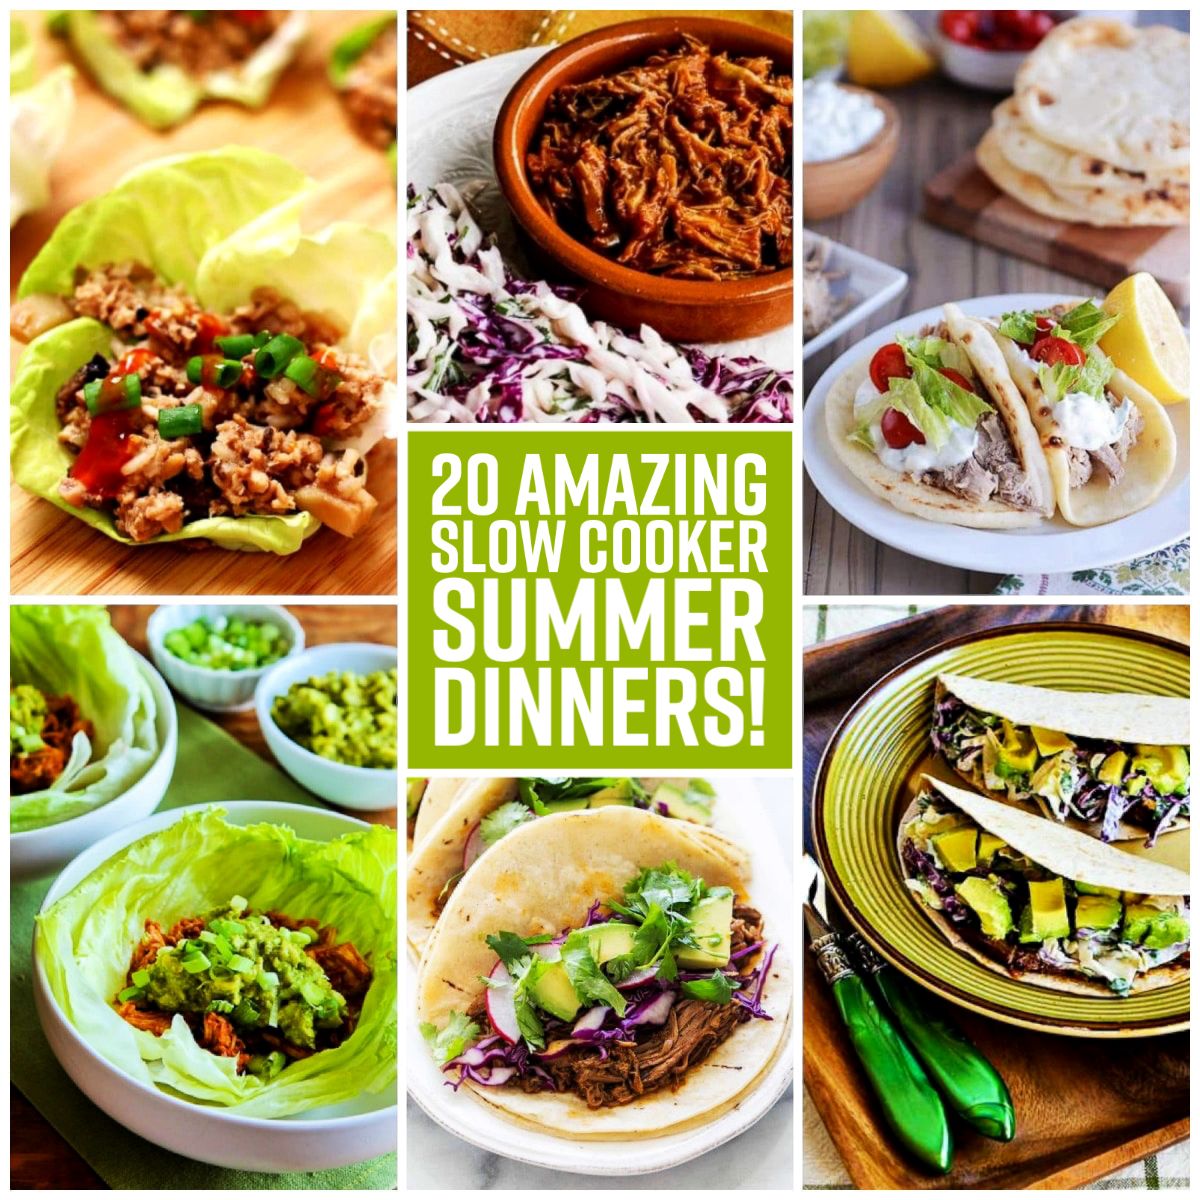 20 Amazing Slow Cooker Summer Dinners text overlay collage of featured recipes.